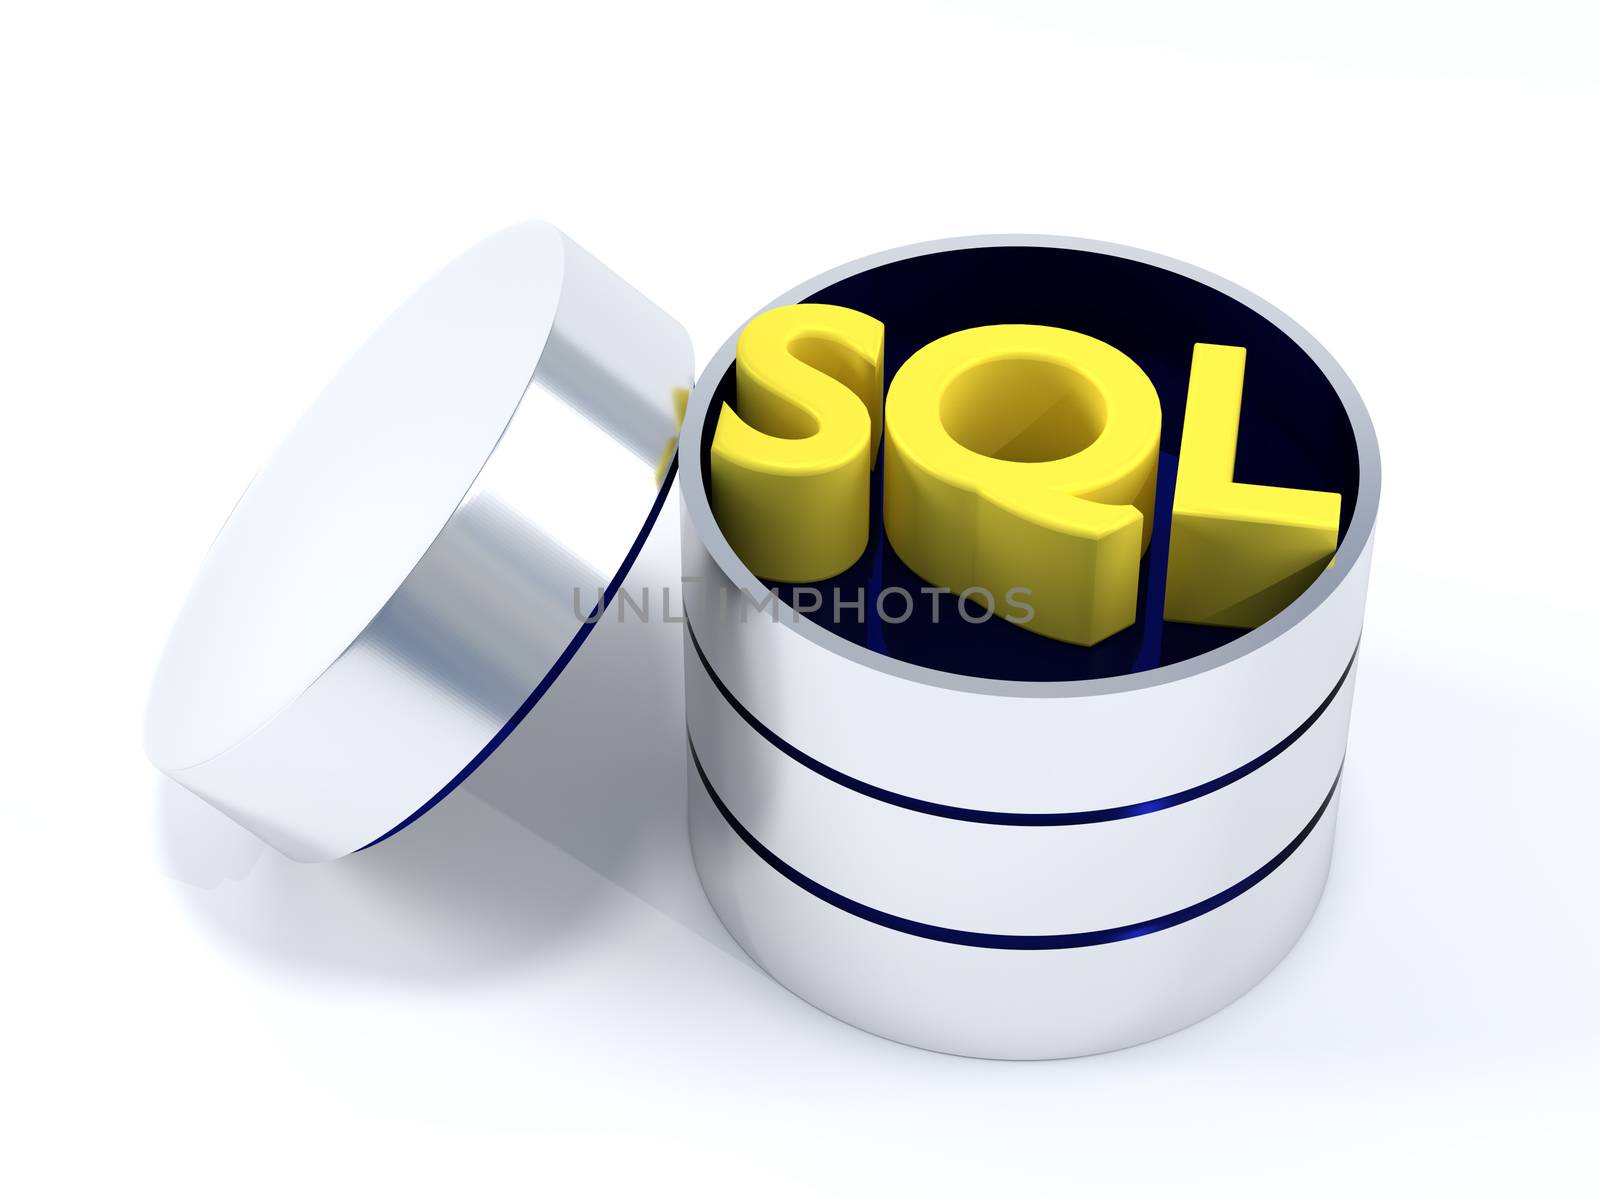 A SQL Database opened containing the word SQL.